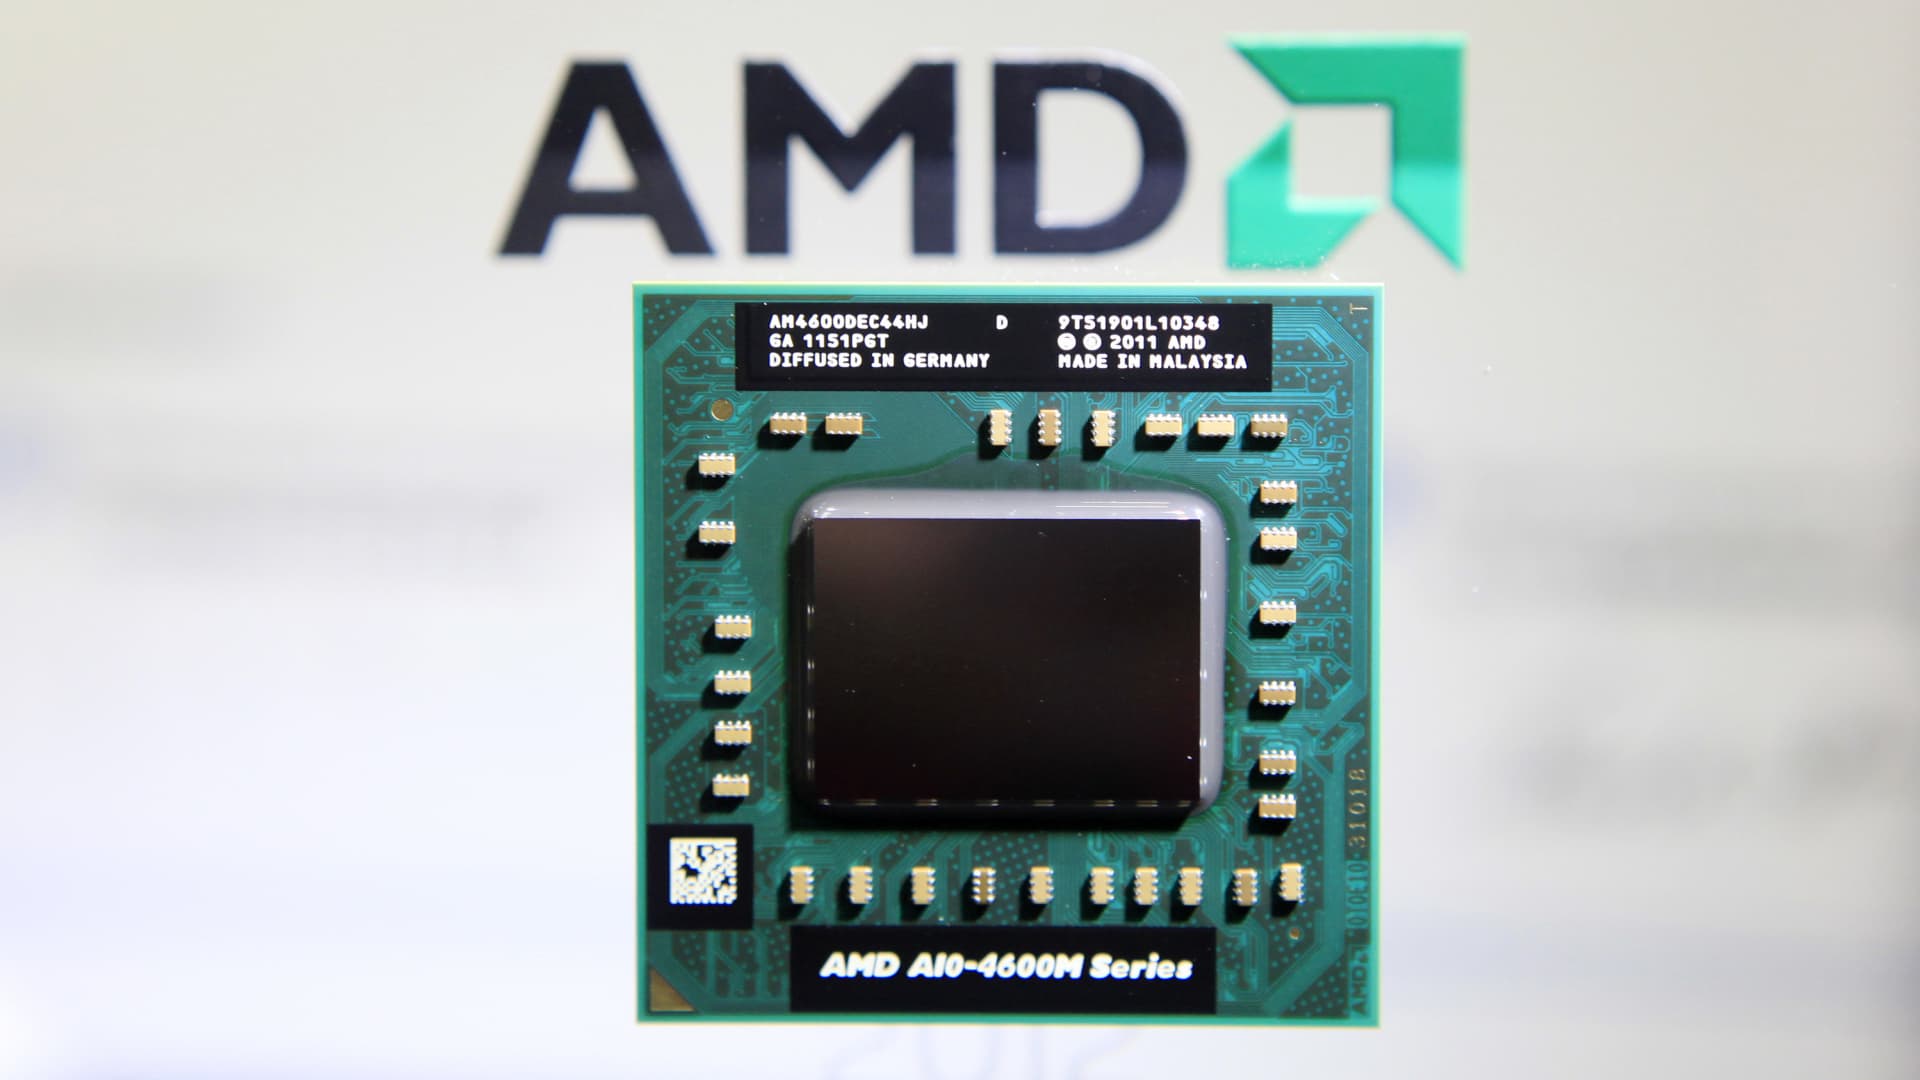 Stocks making the biggest moves midday: Advanced Micro Devices, Alphabet, Sprinklr, Chewy and more